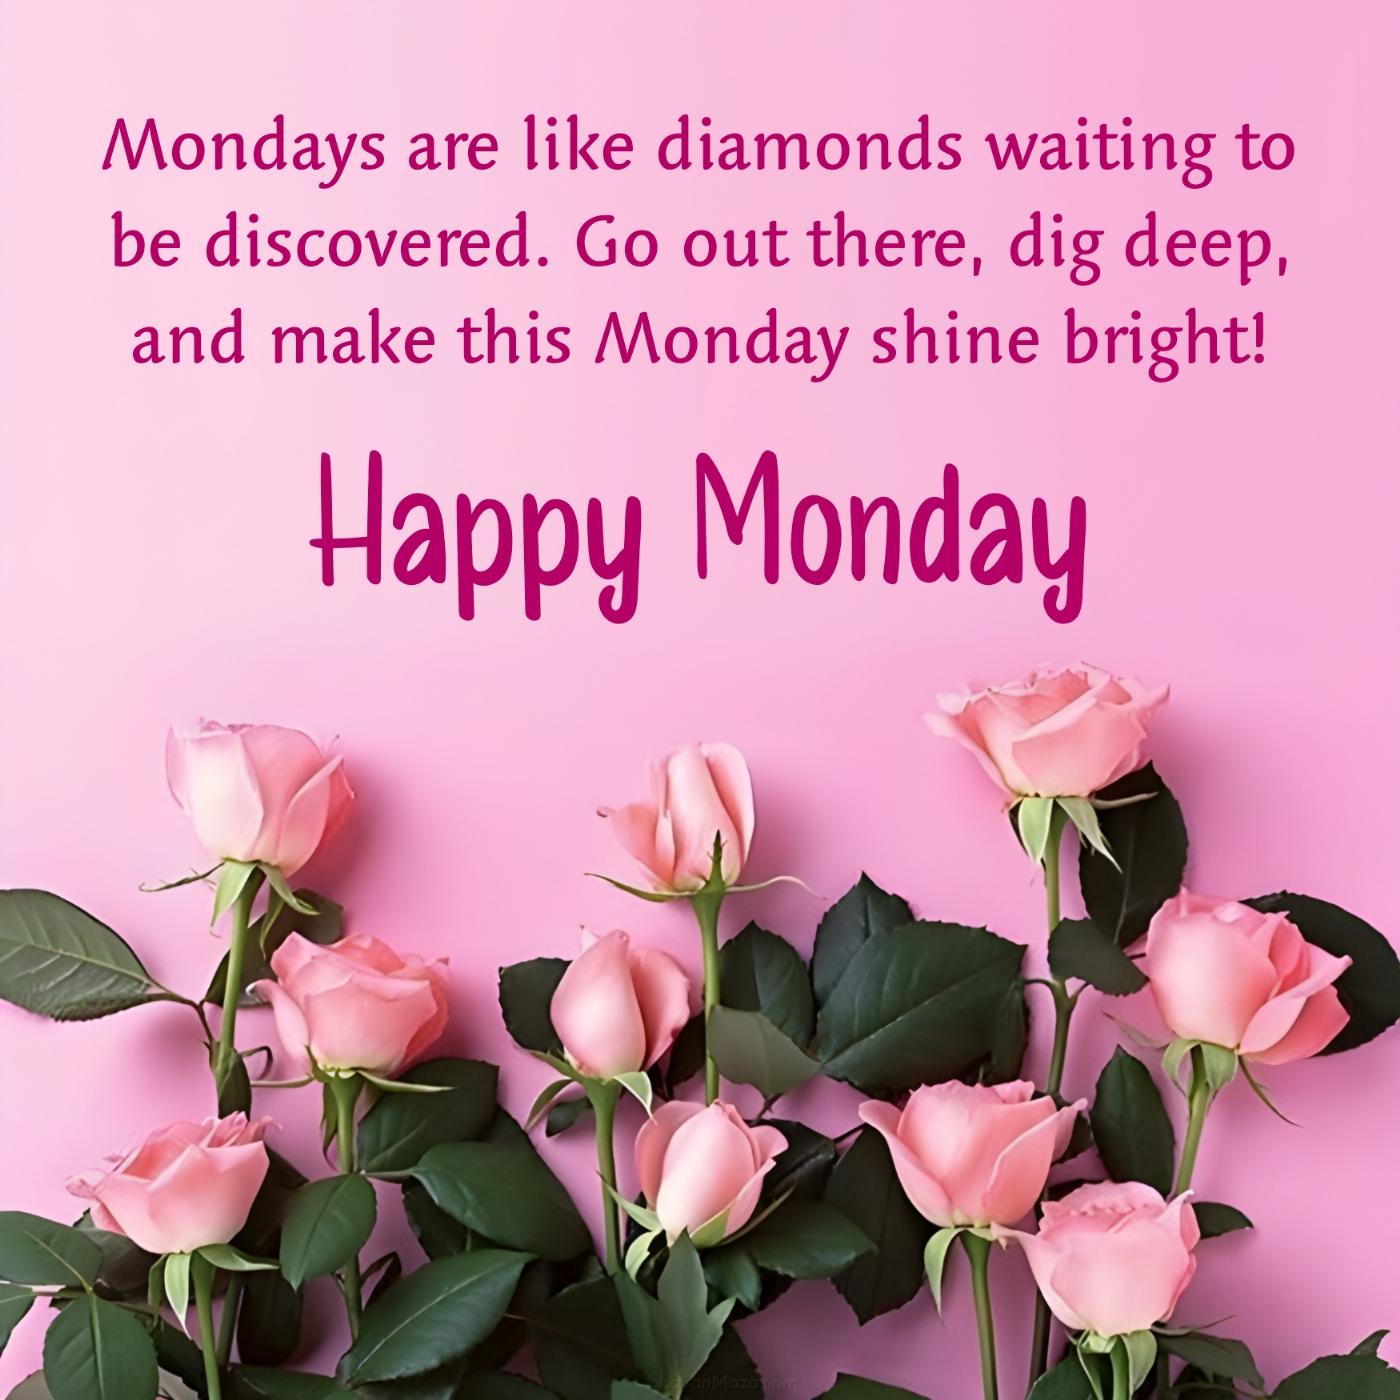 Mondays are like diamonds waiting to be discovered